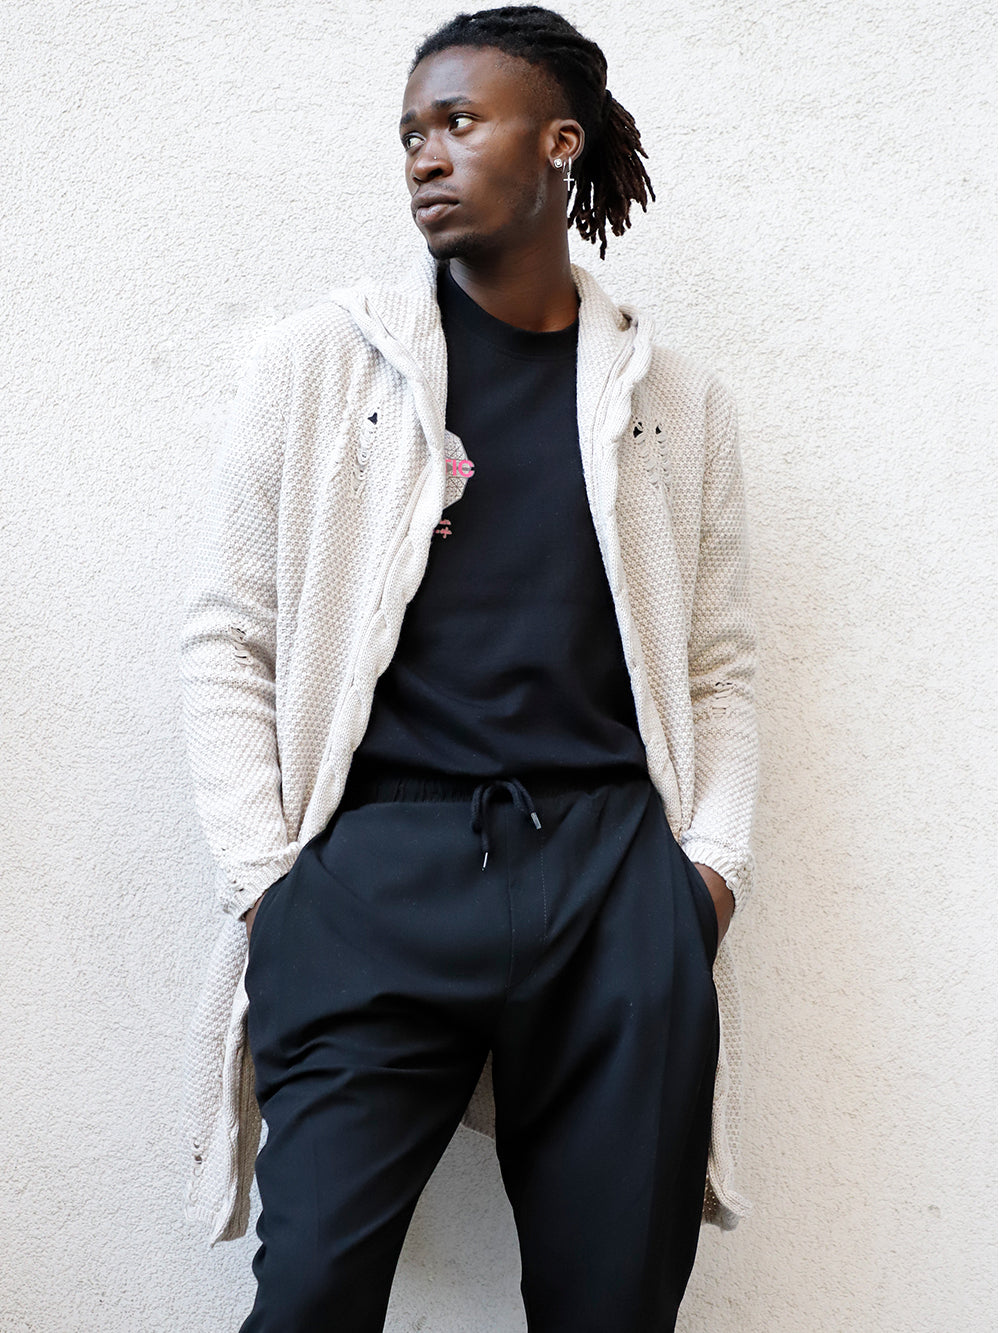 A black man wearing a HOODED DISTRESSED CARDIGAN // STONE leaning against a wall.